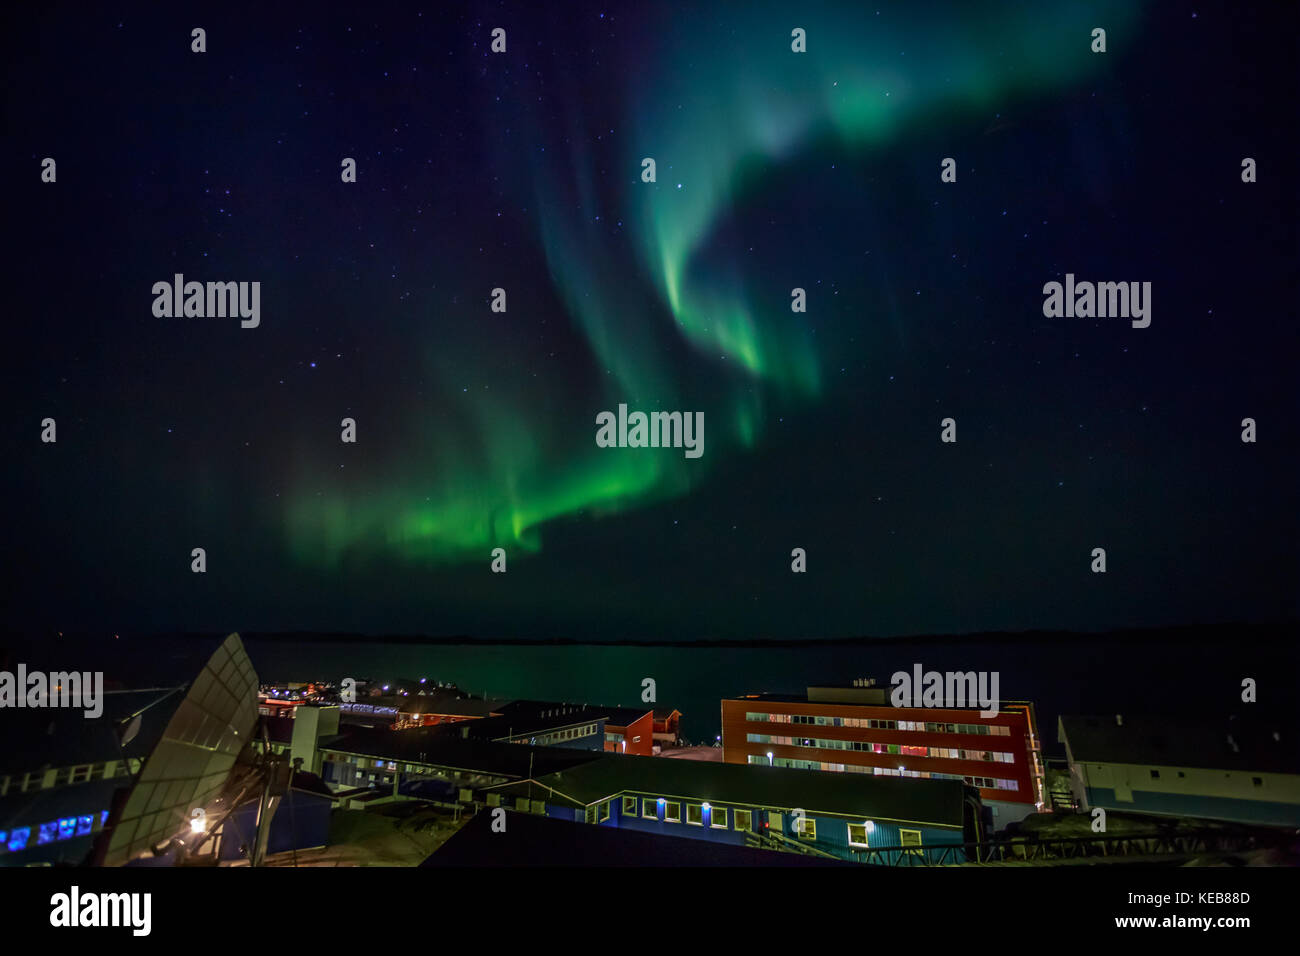 Green lights of Aurora Borealis with shining stars over the night bay and highlighted buildings of Nuuk city, Greenland Stock Photo